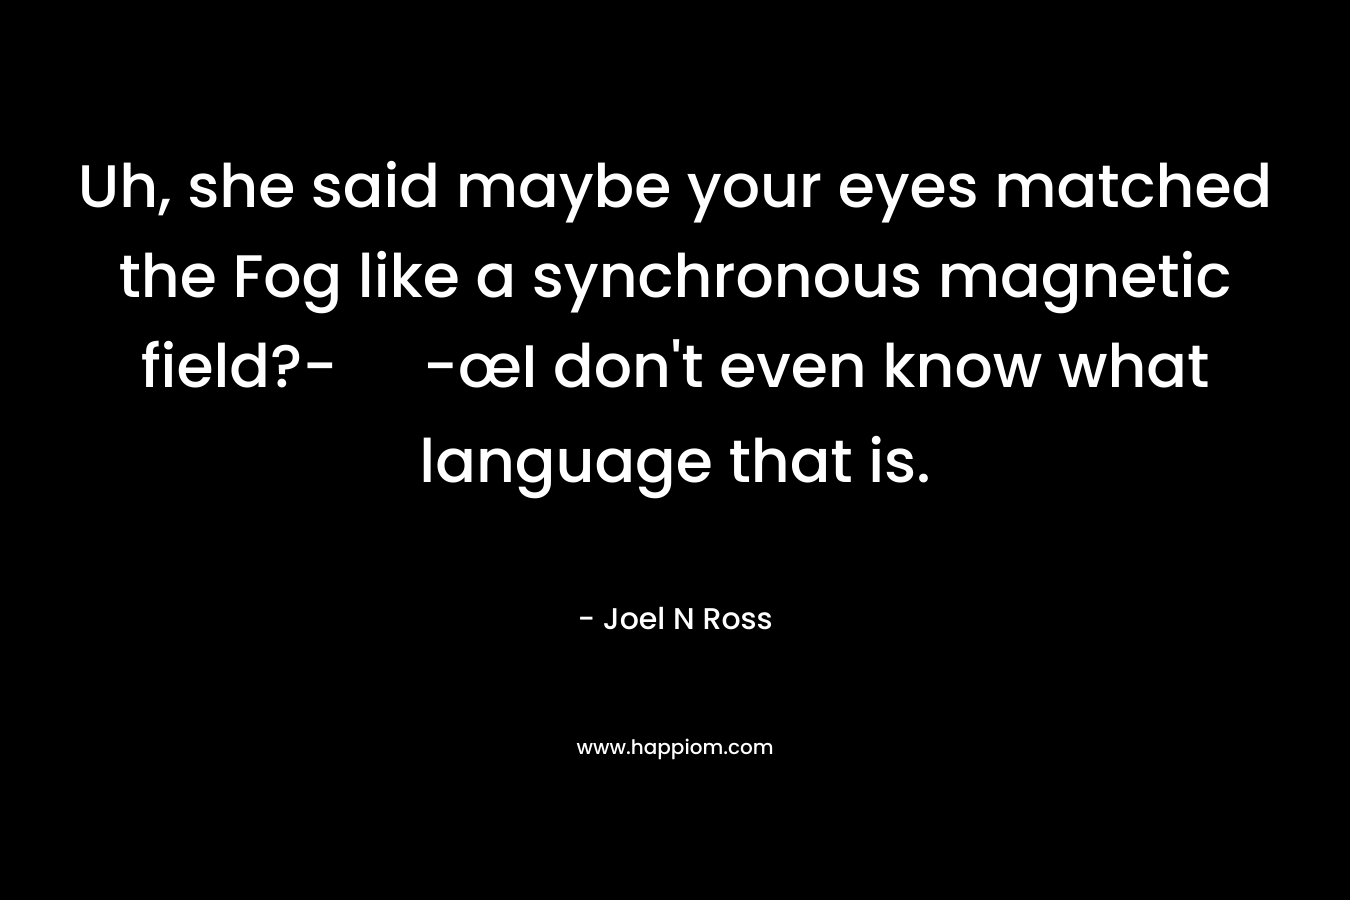 Uh, she said maybe your eyes matched the Fog like a synchronous magnetic field?- -œI don’t even know what language that is. – Joel N Ross